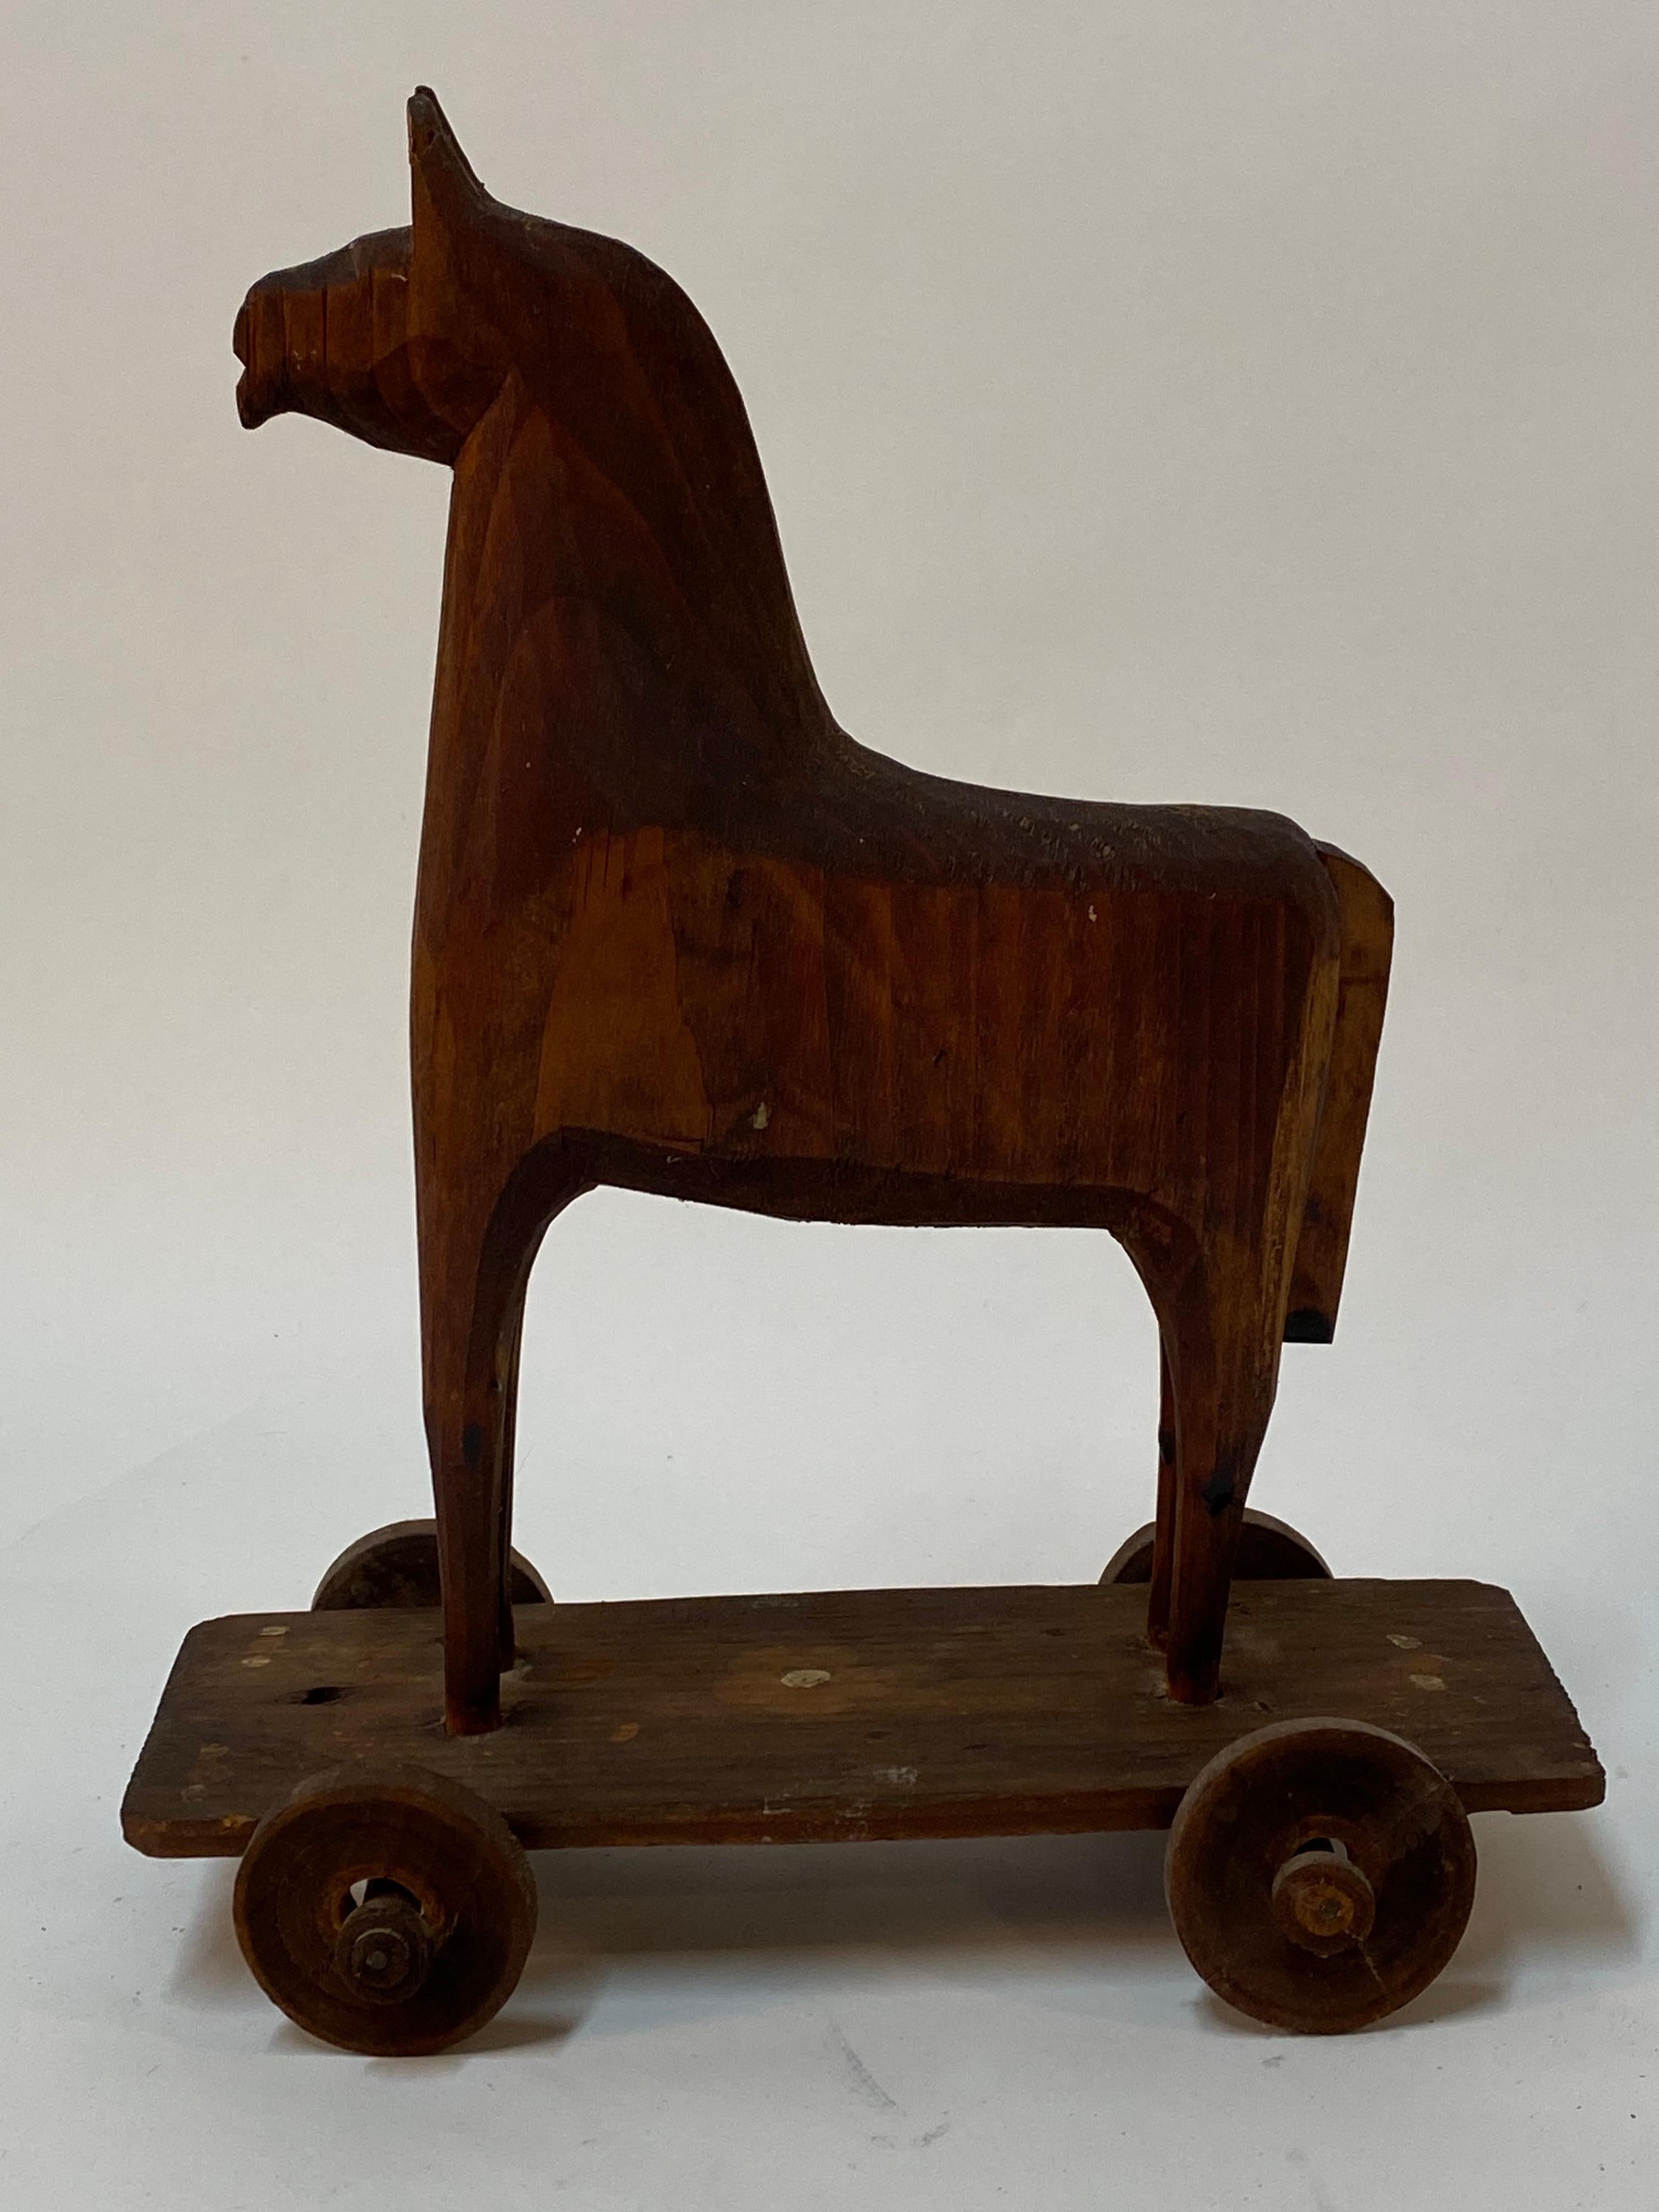 Fantastic hand crafted carved wood horse pull toy. Possibly made from scraps of wood during the Depression Era resembling a Trojan Horse of sorts. Carved pine. There are few nails used in the construction where the tail and the wheels are applied to